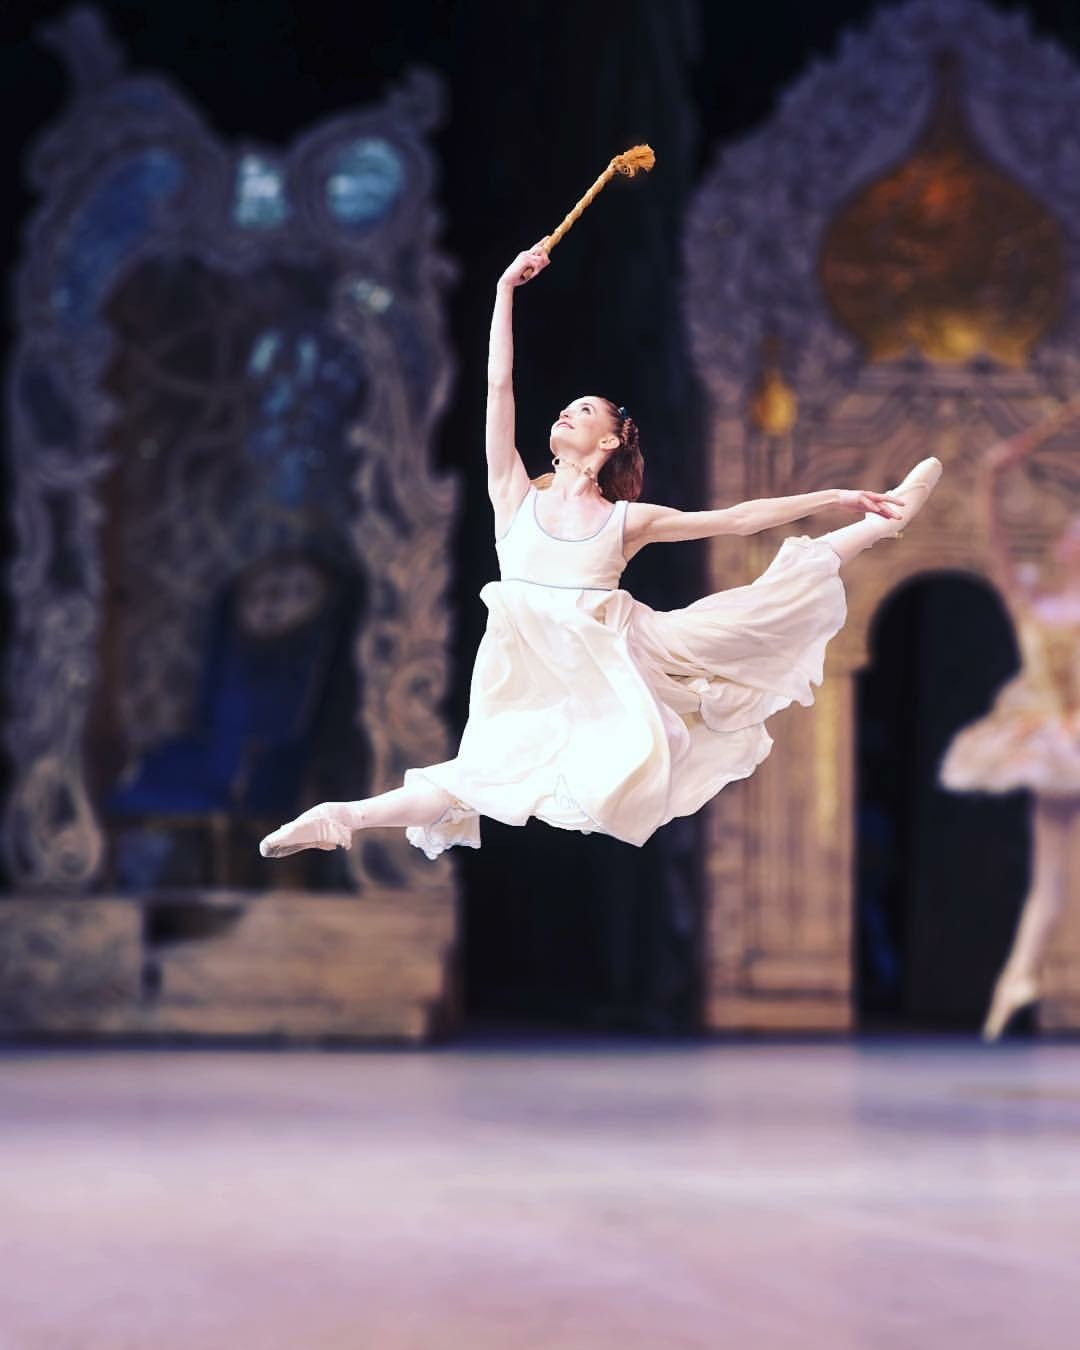 Ballerina Anna Rose O'Sullivan dancing in a live performance on stage 